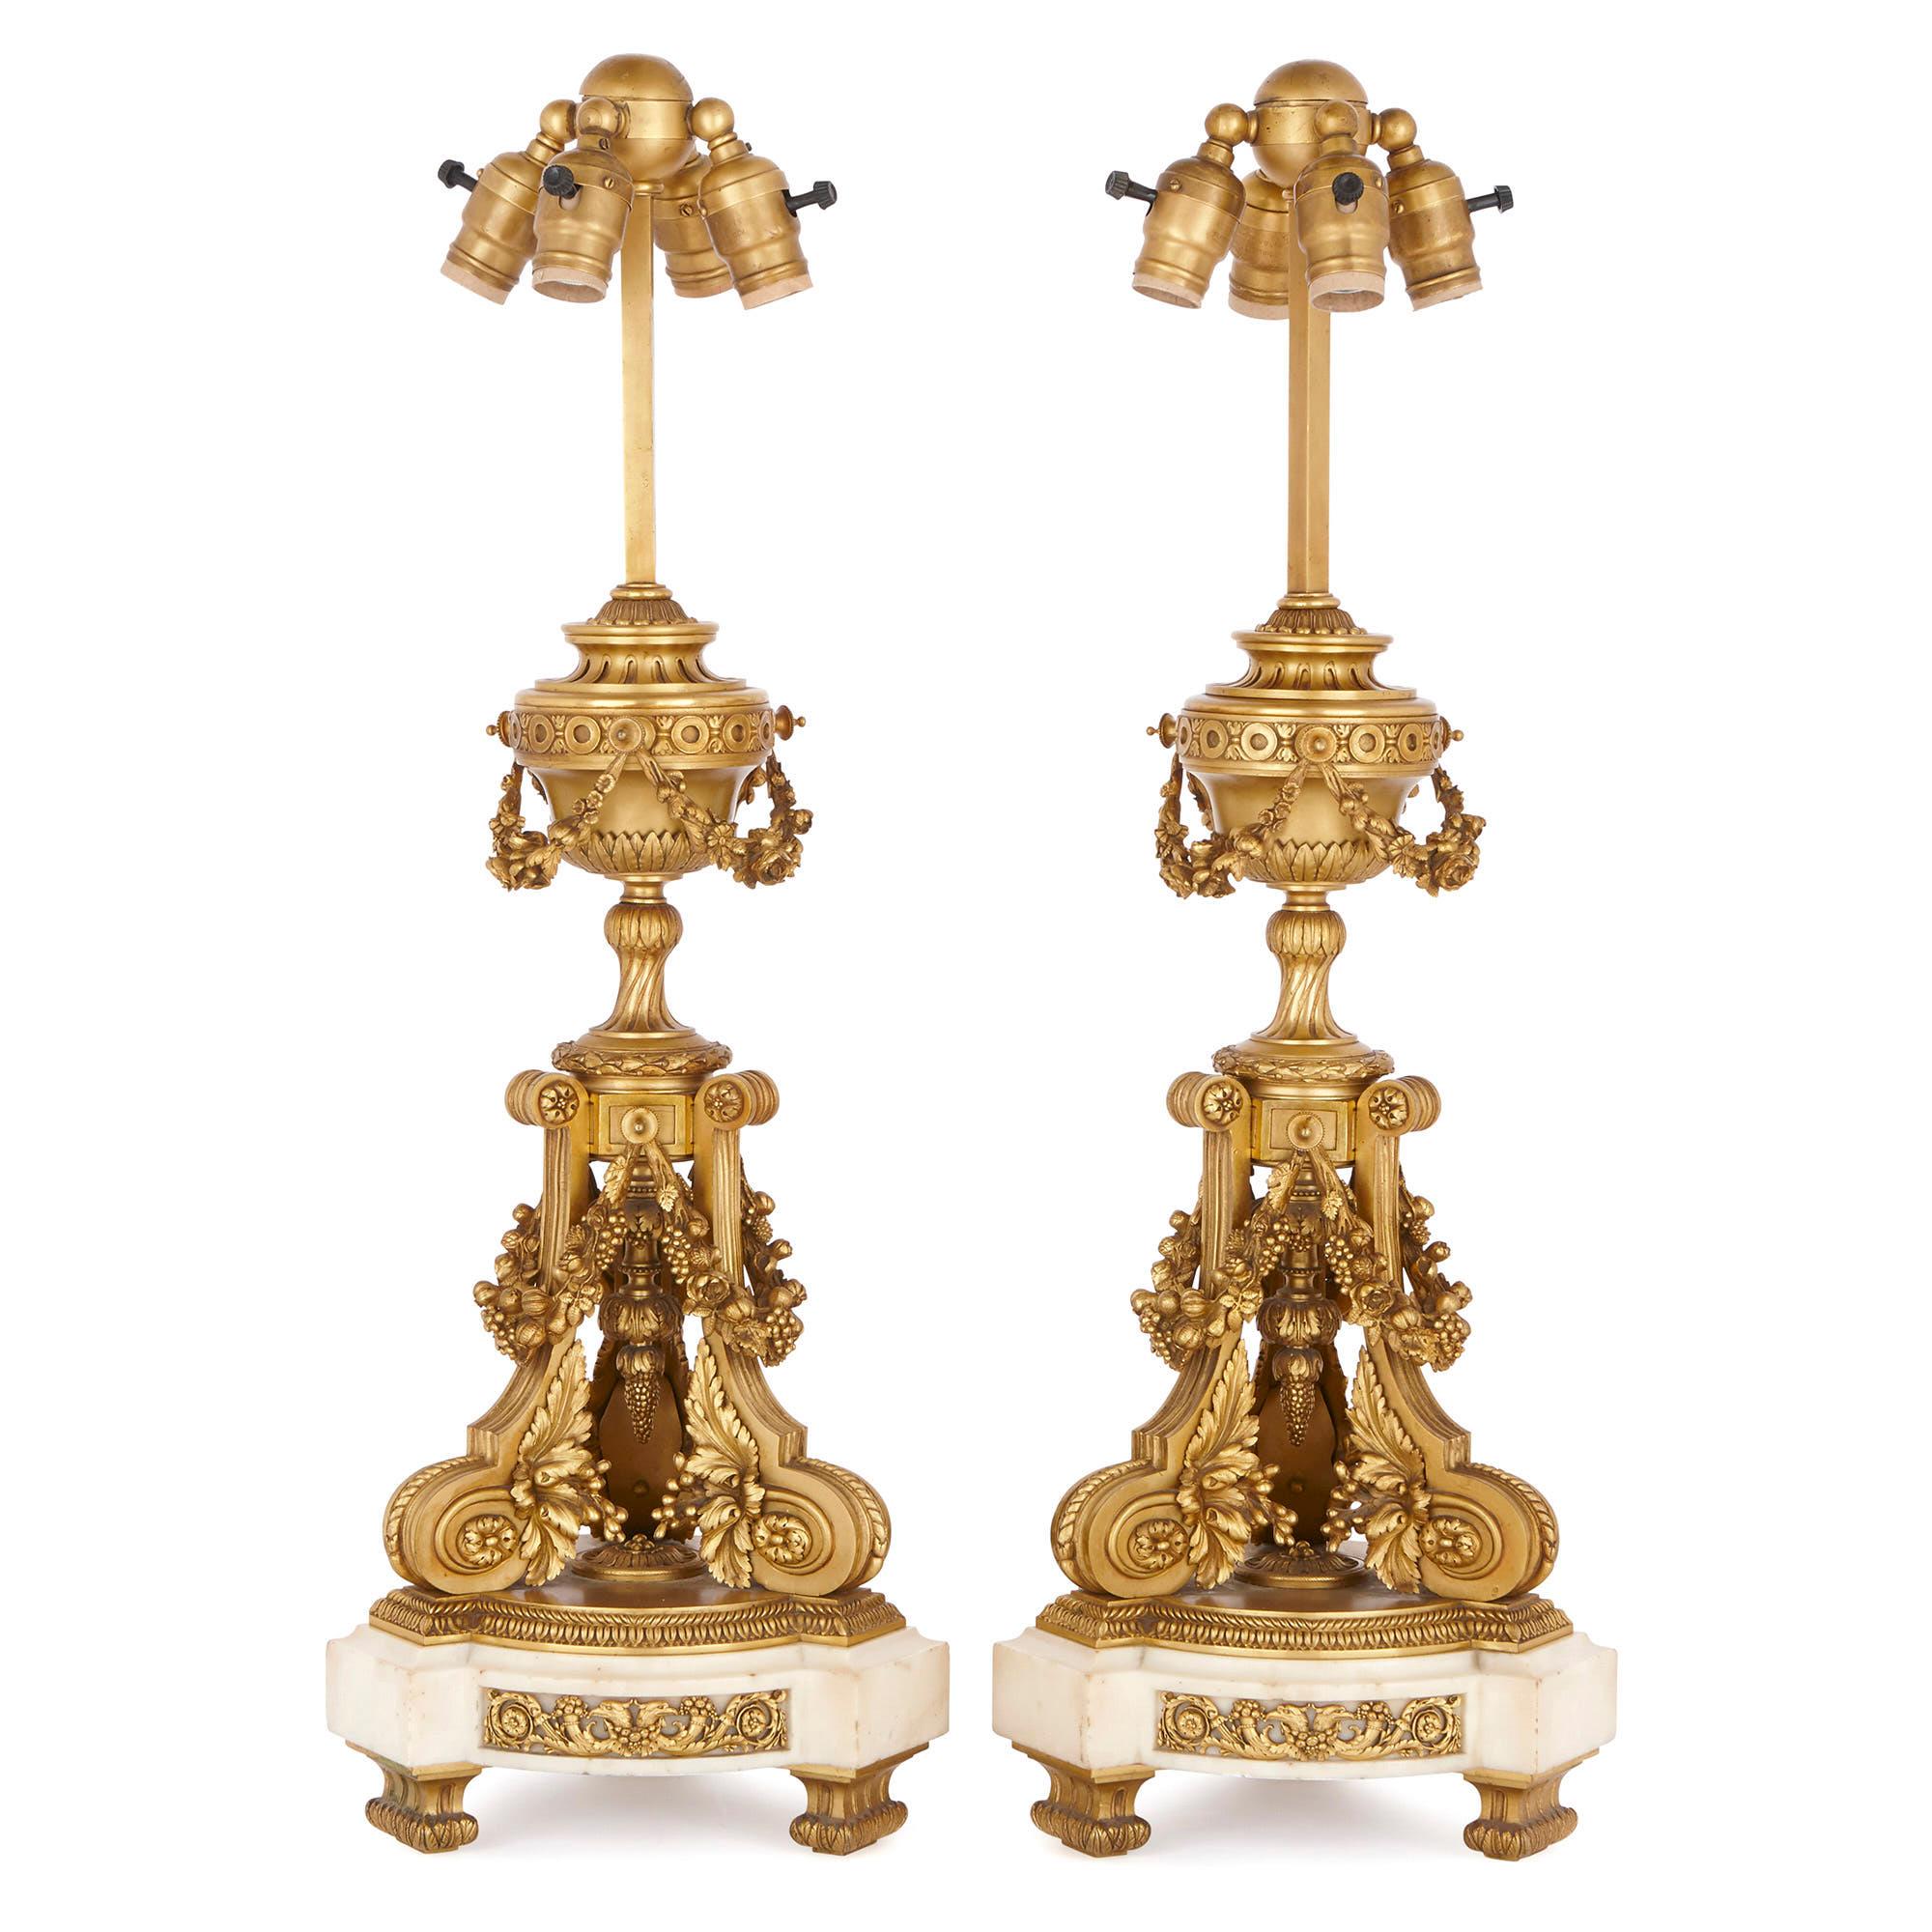 These exquisite gilt bronze (ormolu) lamps were crafted in the late 19th century in France. With their classically-inspired urns, scrolls, foliage, flower and fruit swags, these lamps are clearly inspired by Louis XV period decorative arts. 

Each